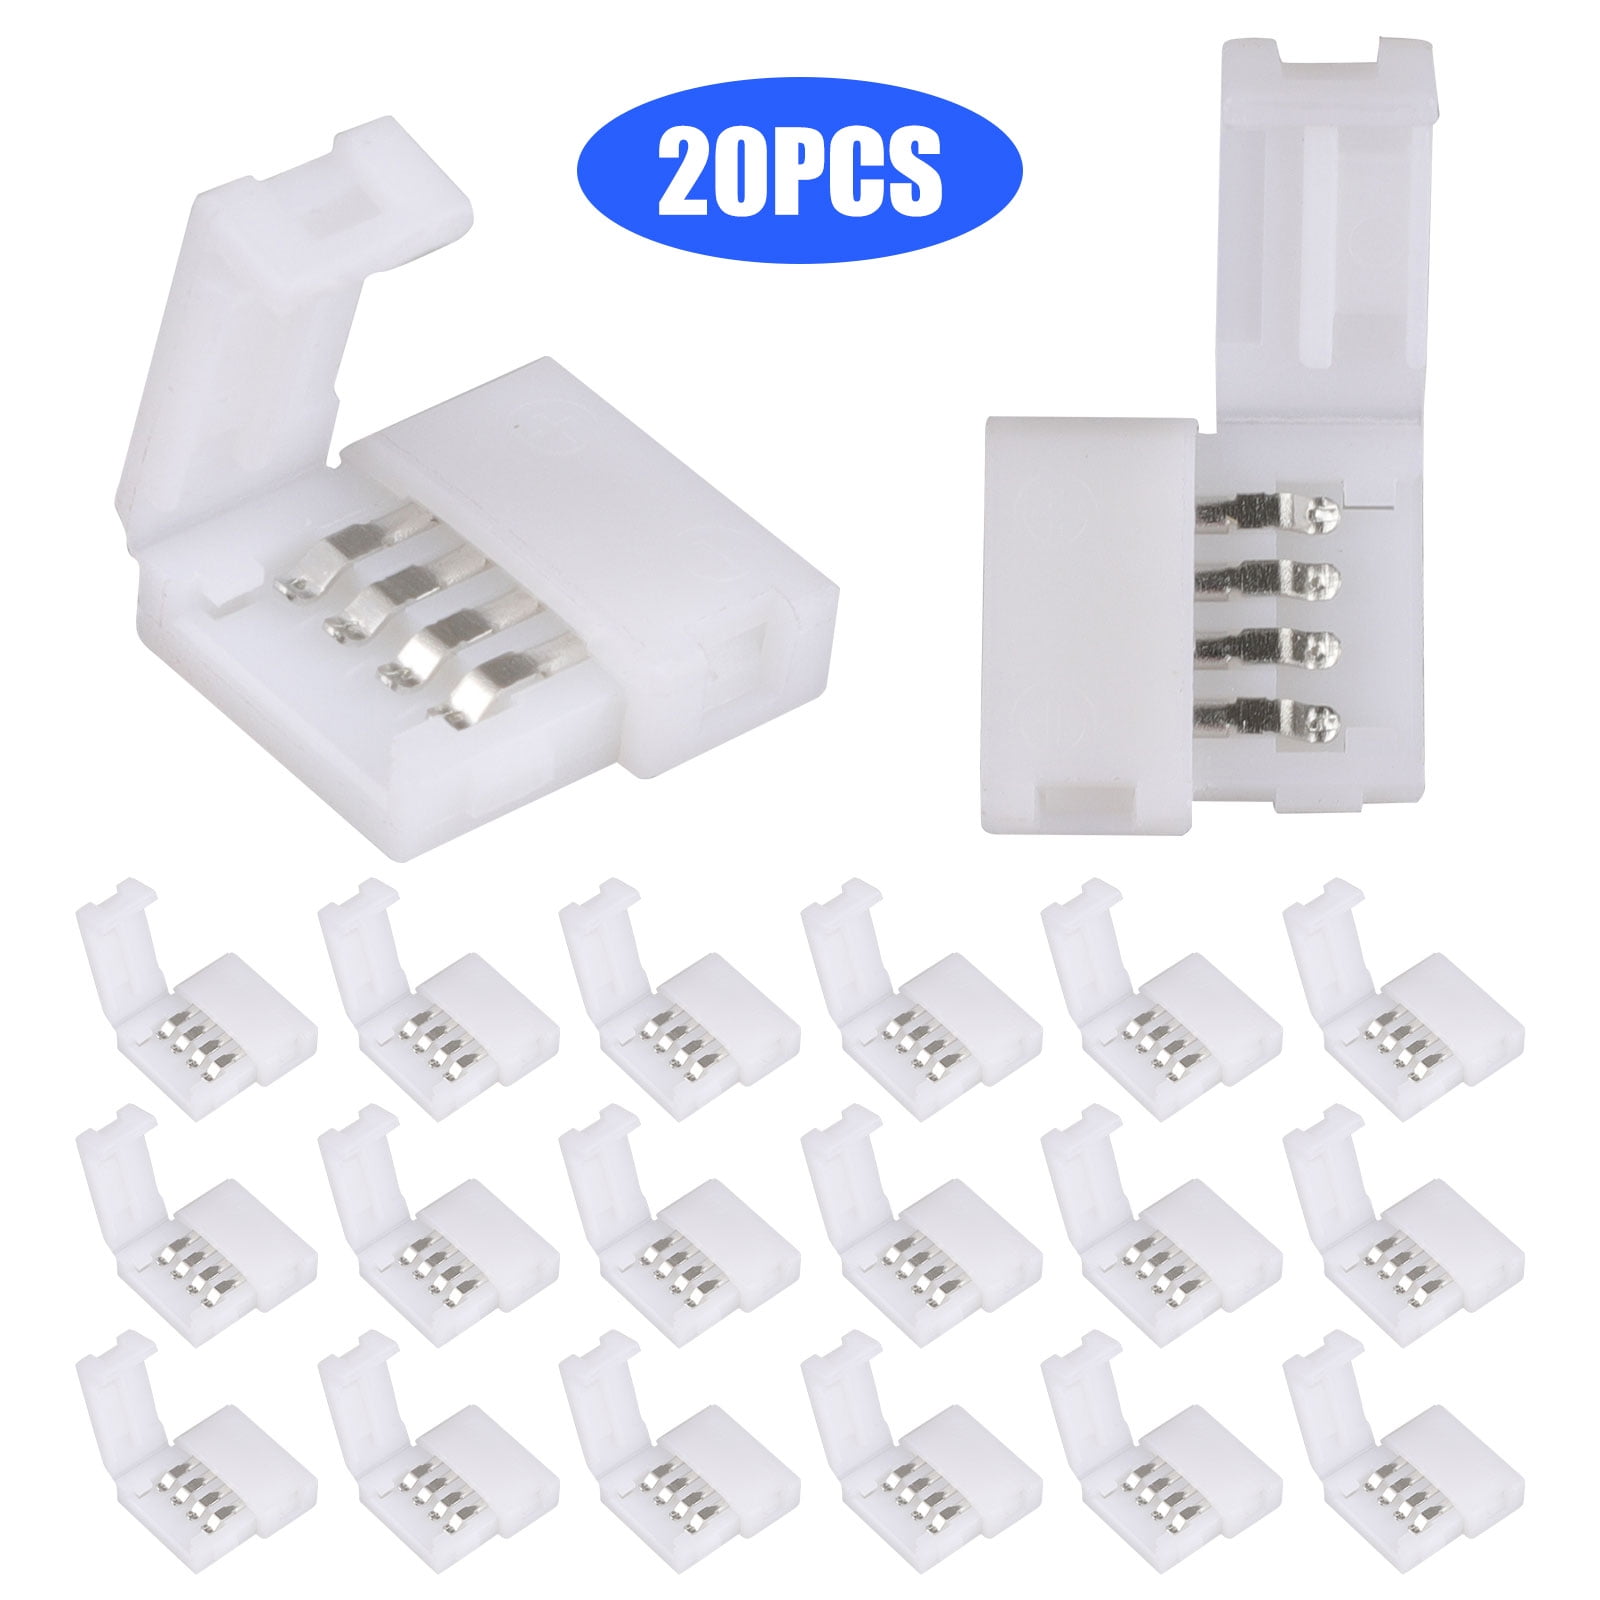 2 Pin L Shape Solderless LED Connector Clips, Max Amp 5A, 90° Connection of  10mm Width Single Color LED Strip Light